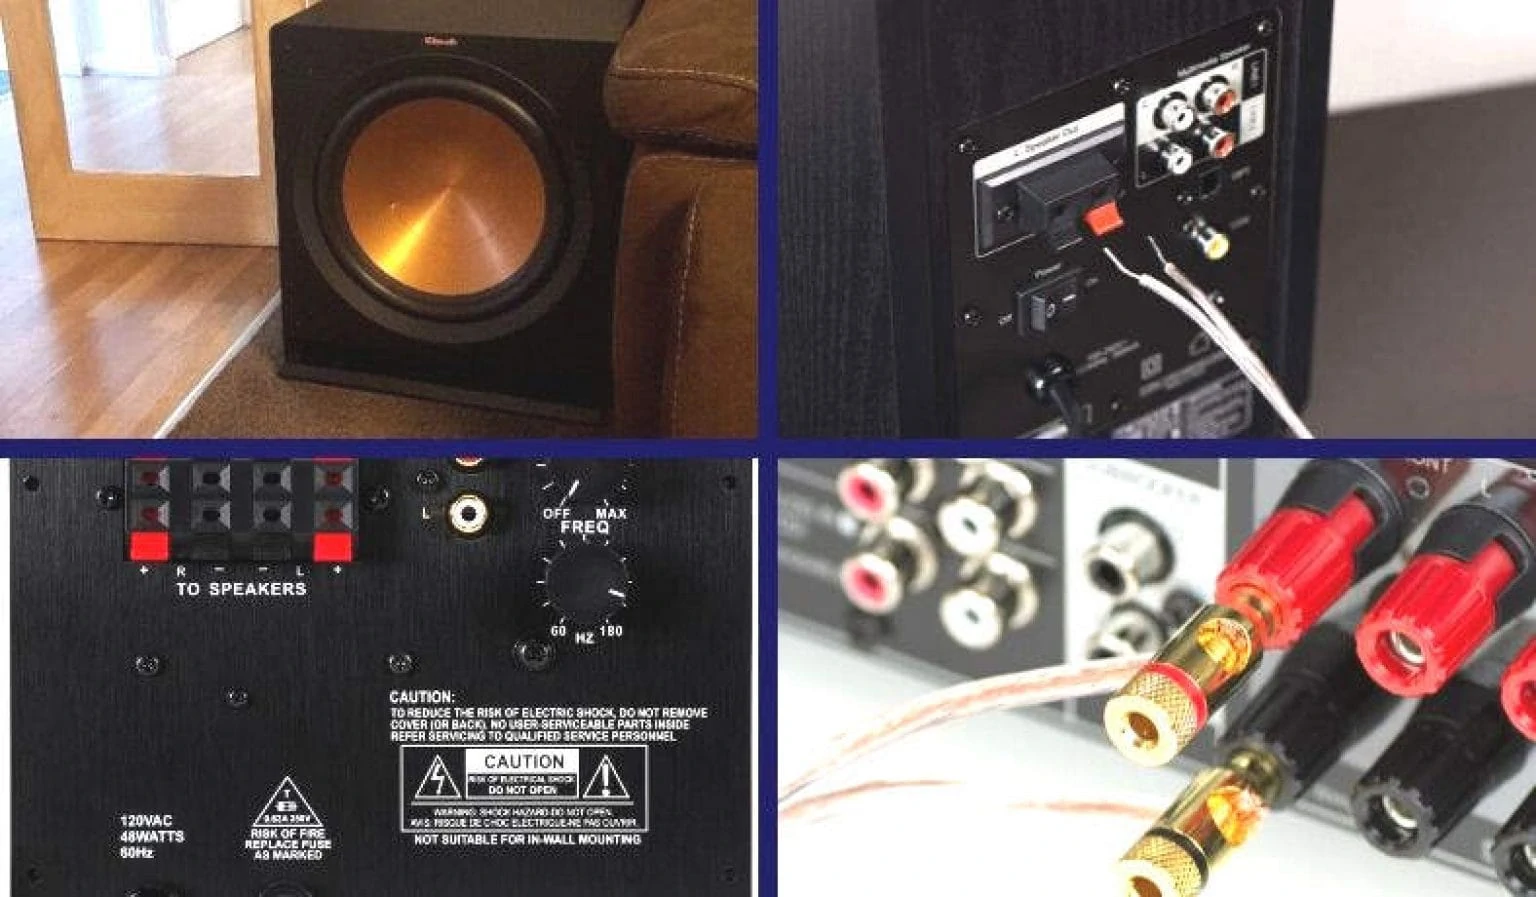 How to connect subwoofer to receiver without subwoofer output featured imag...